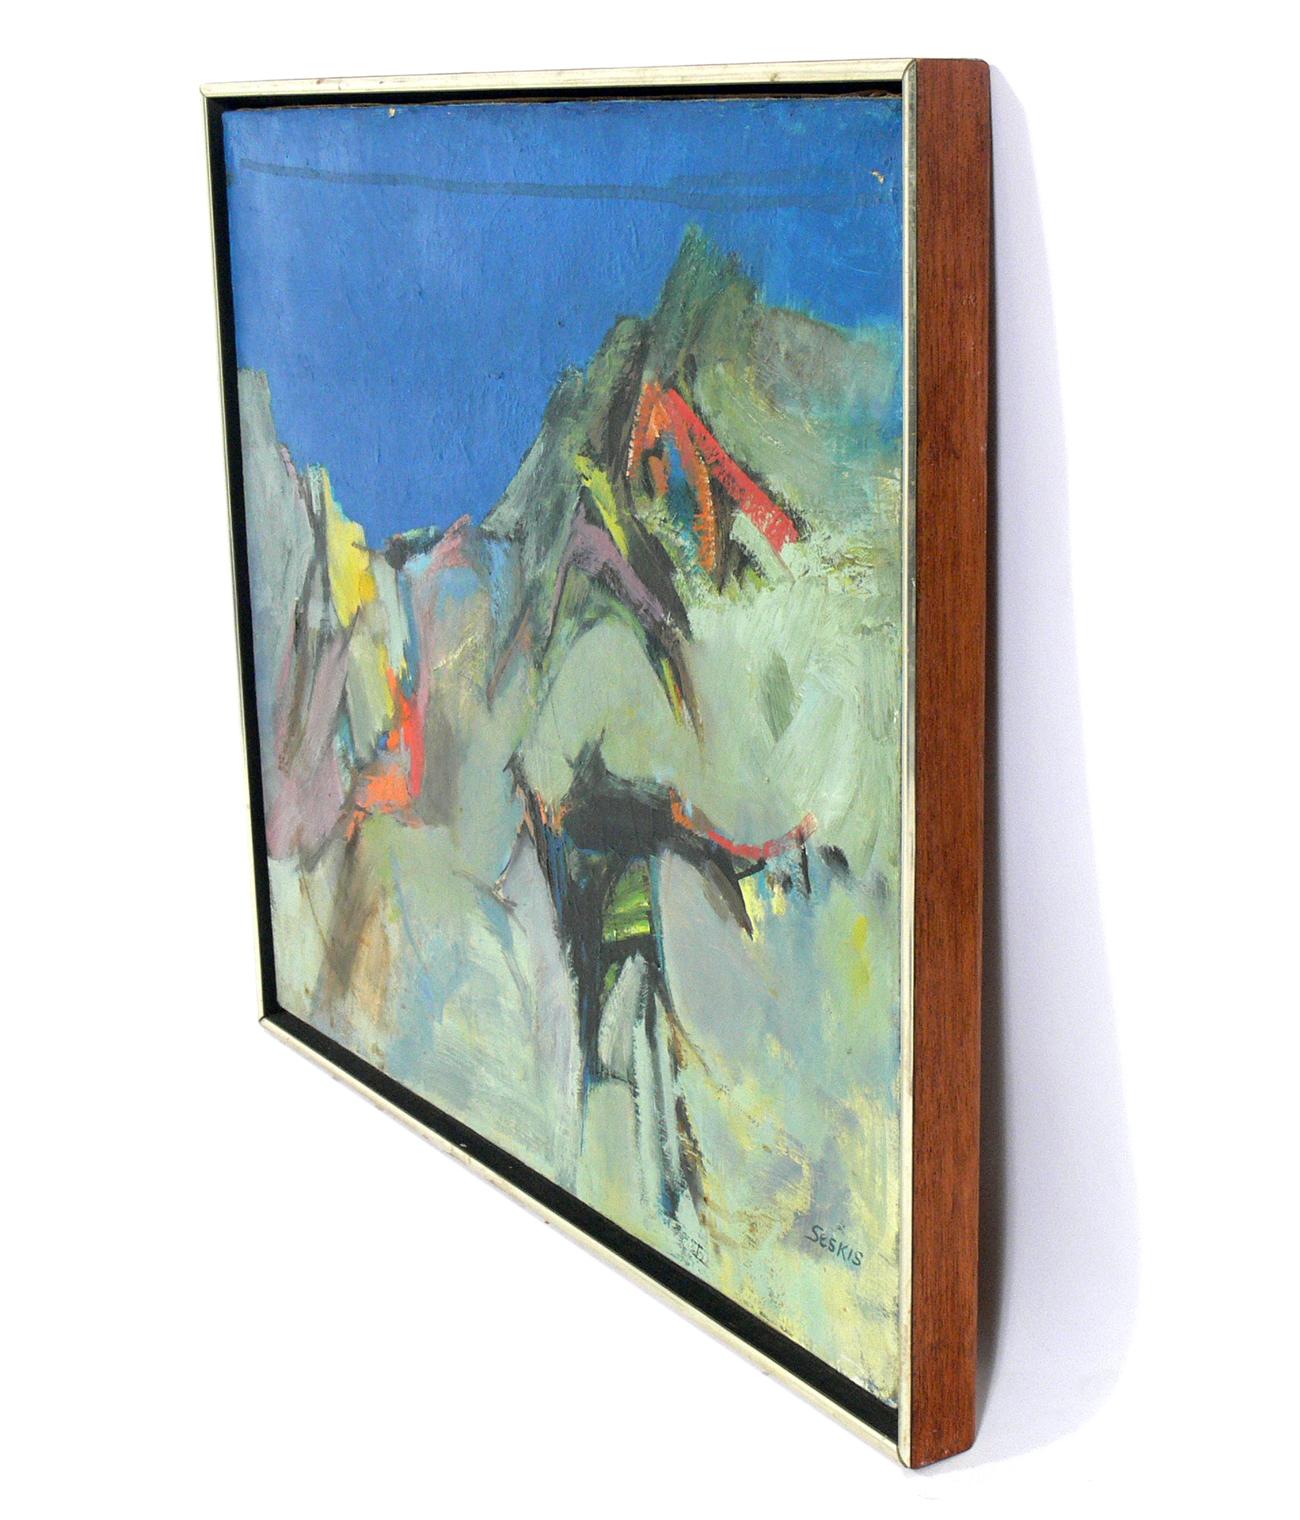 Midcentury abstract painting, American, circa 1960s. This painting is signed 